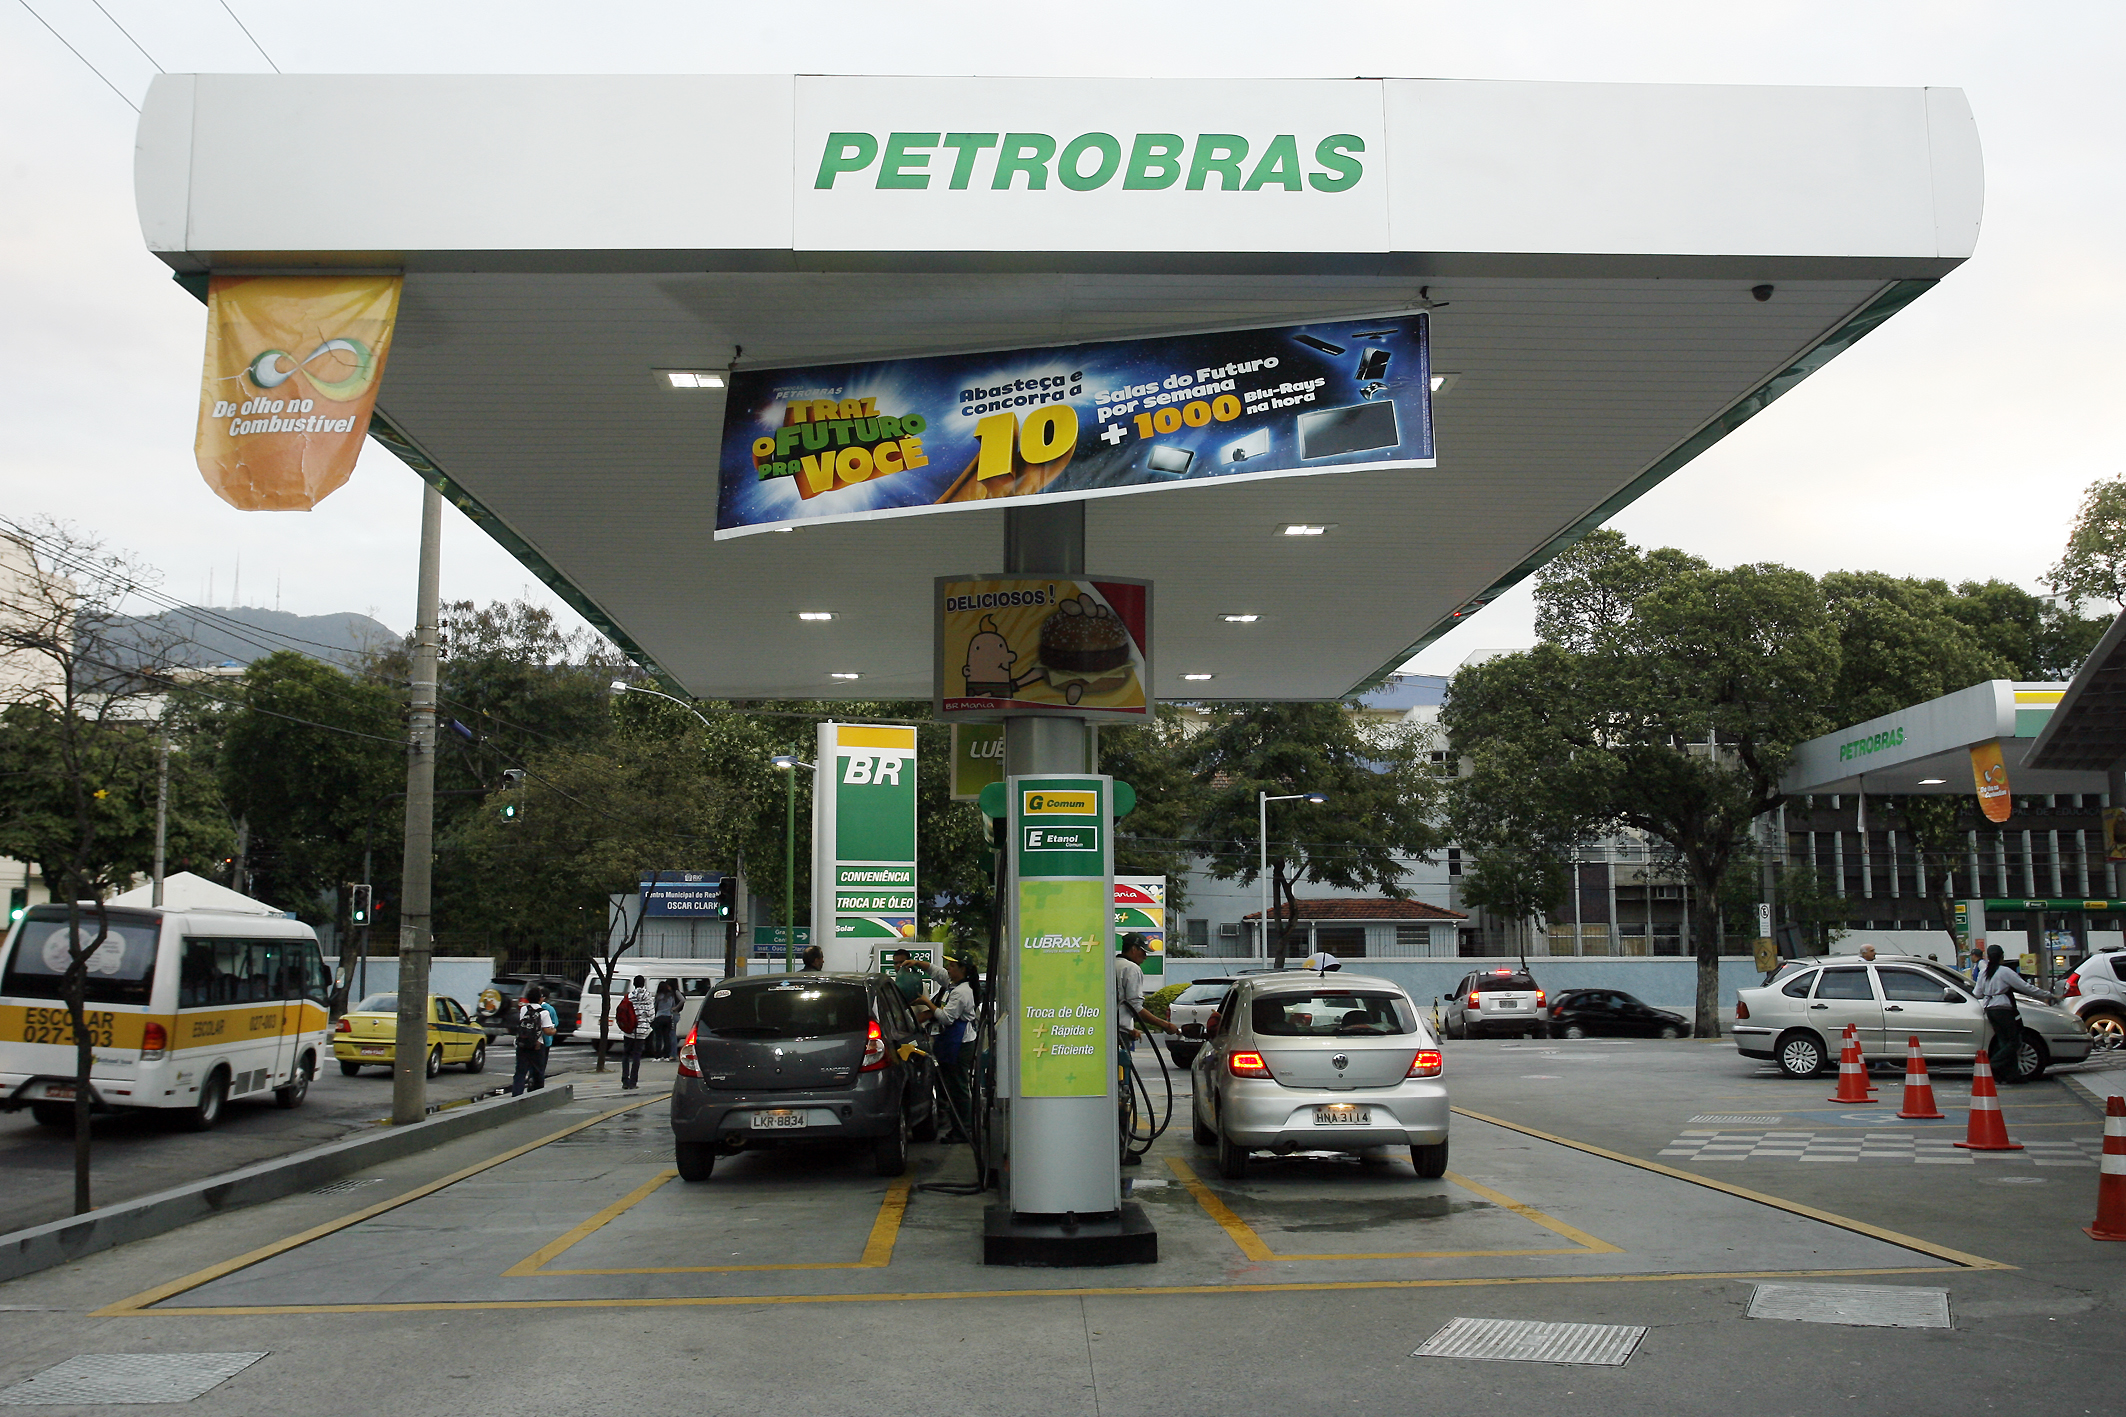 Petrobras is importing more gasoline and diesel to meet Brazil's growing consumption, Rio de Janeiro, Brazil News